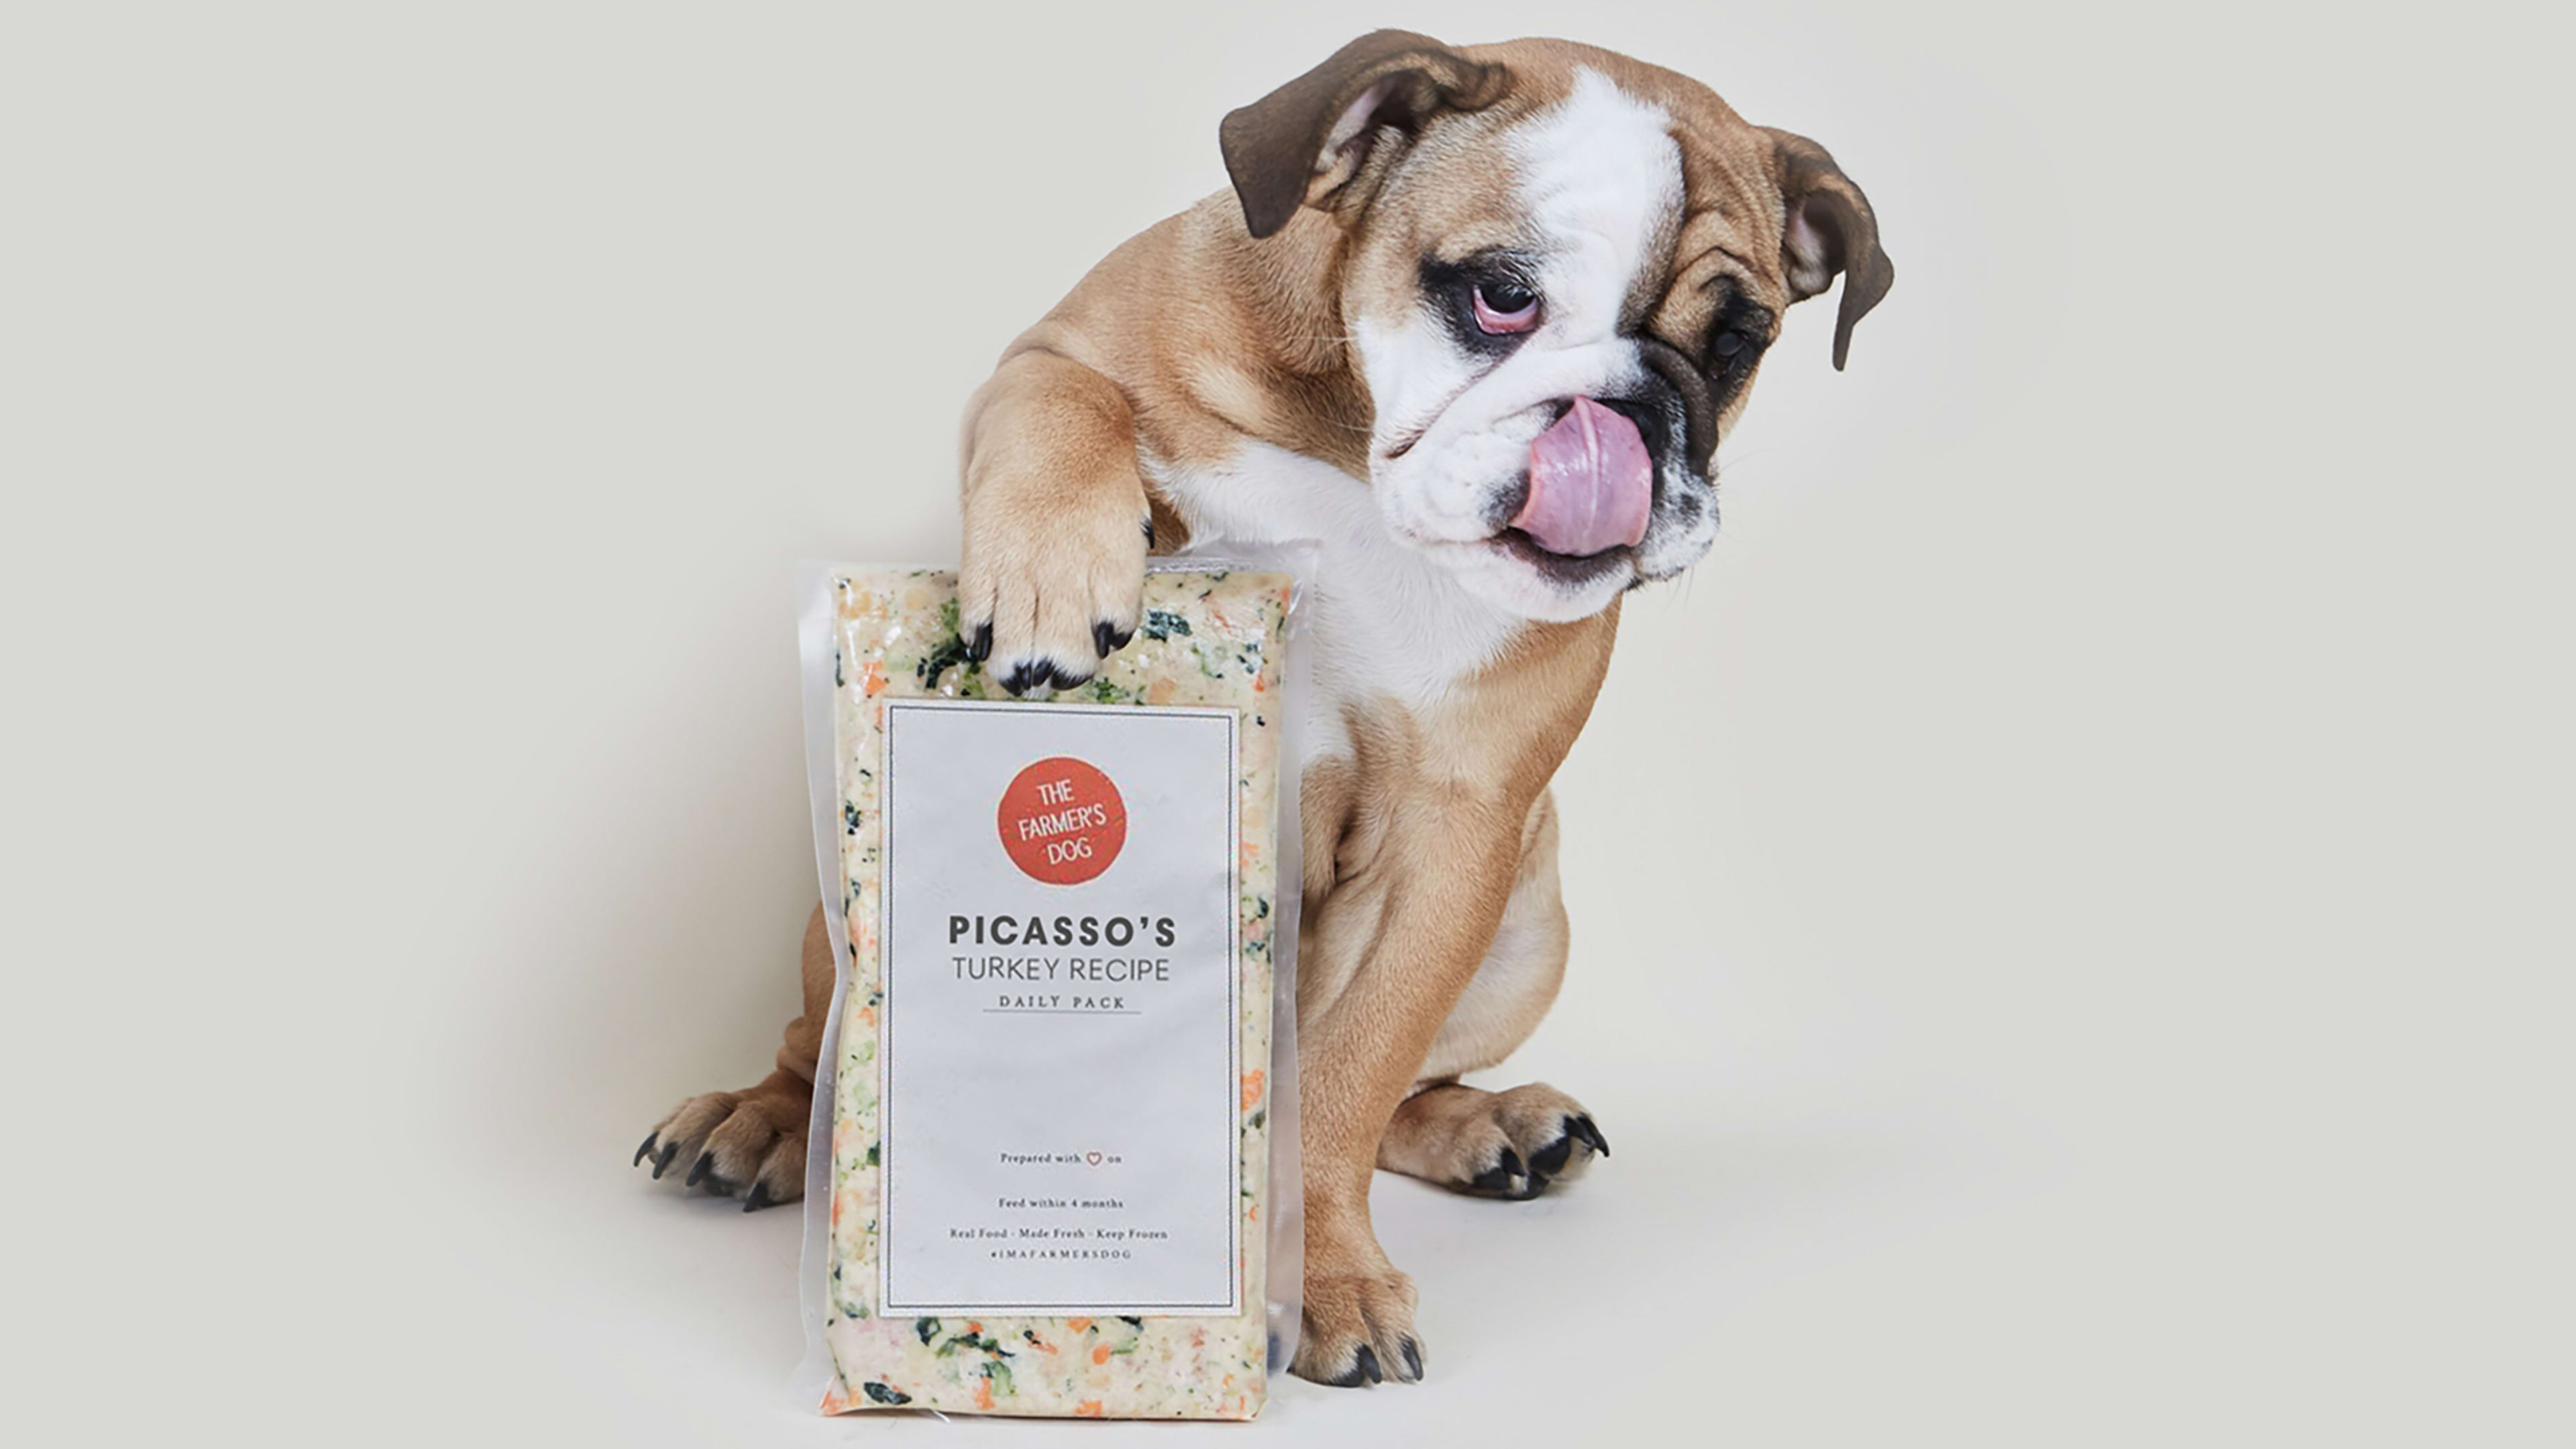 This doggie wellness startup raised $49M to help your pup eat, feel, and smell better